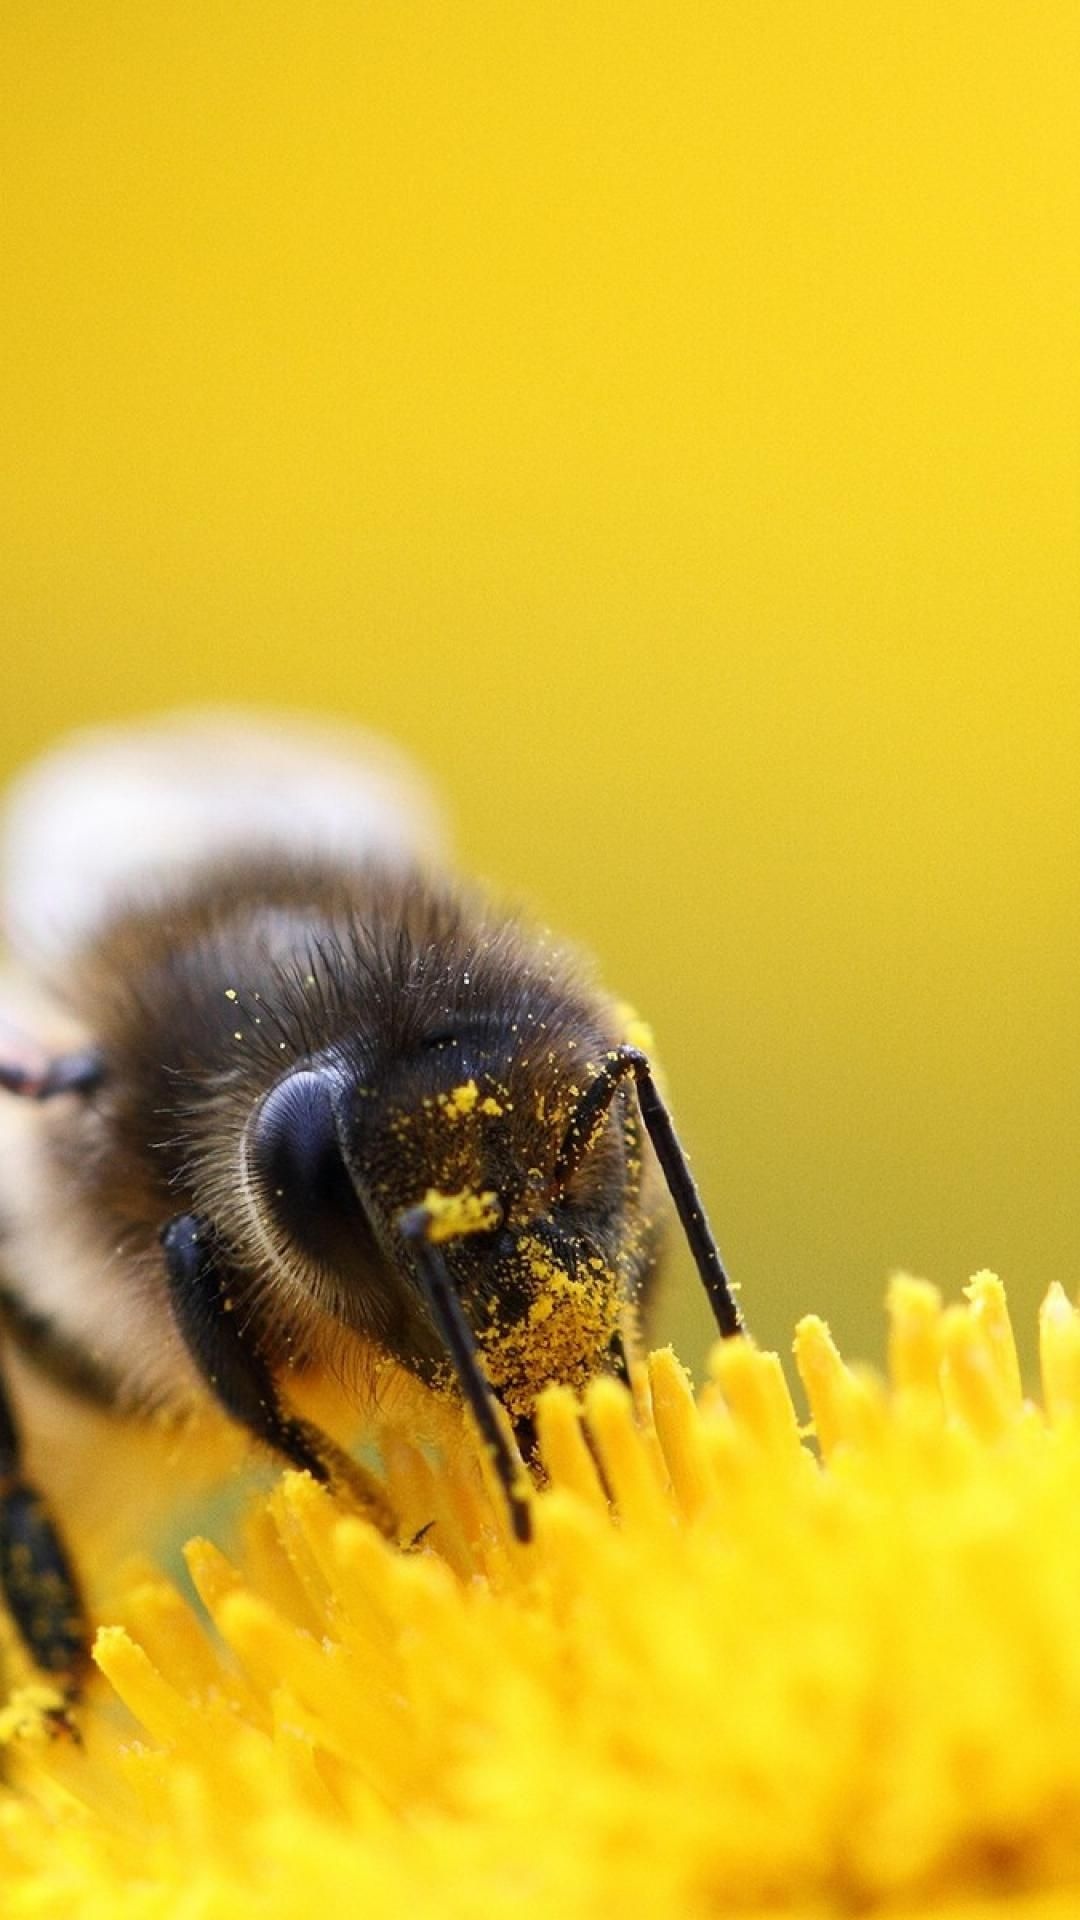 Bee: Winged insects closely related to wasps and ants, Pollen. 1080x1920 Full HD Wallpaper.